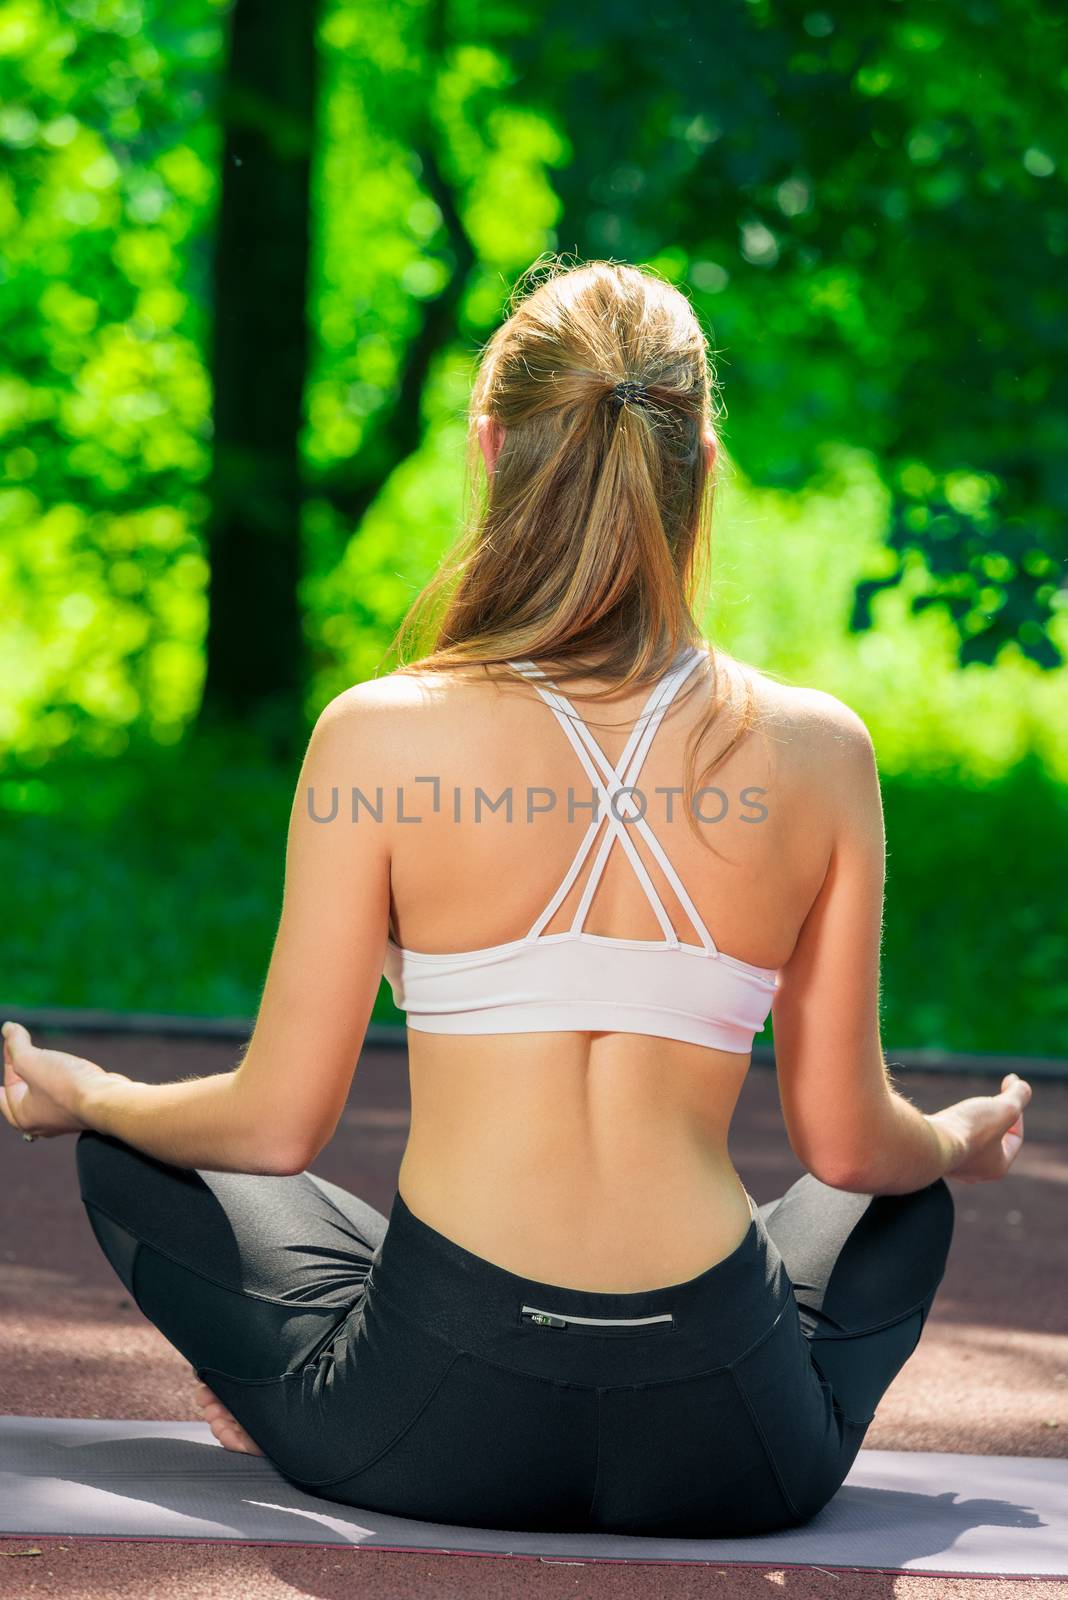 simple yoga asanas - trainer in lotus position view from the back